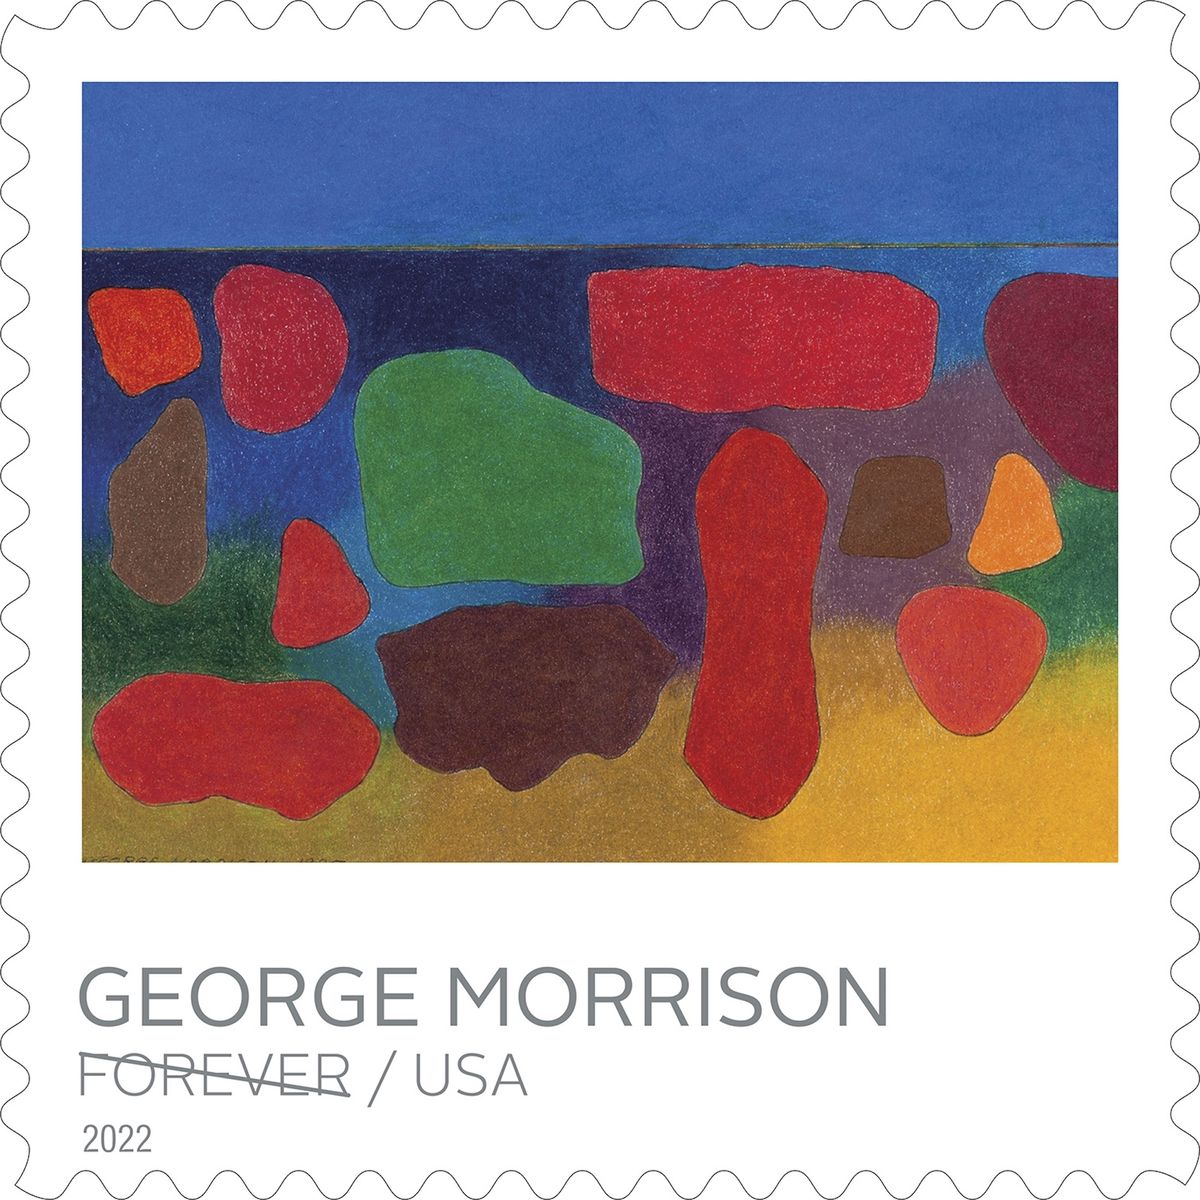 New stamp featuring Untitled, 1995, by George Morrison Courtesy United States Postal Service